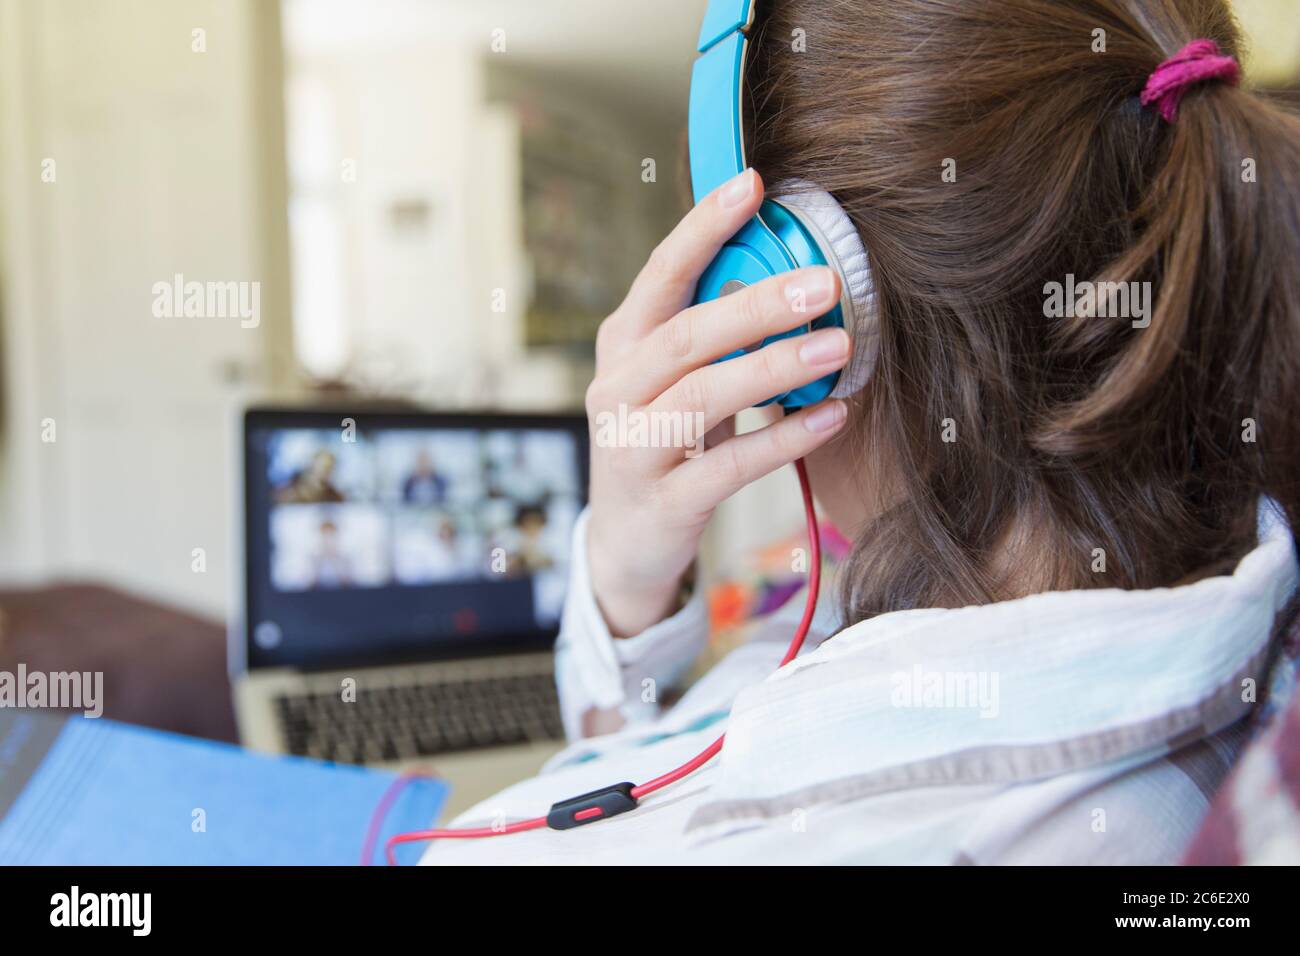 Teenage girl with headphones video chatting at laptop Stock Photo